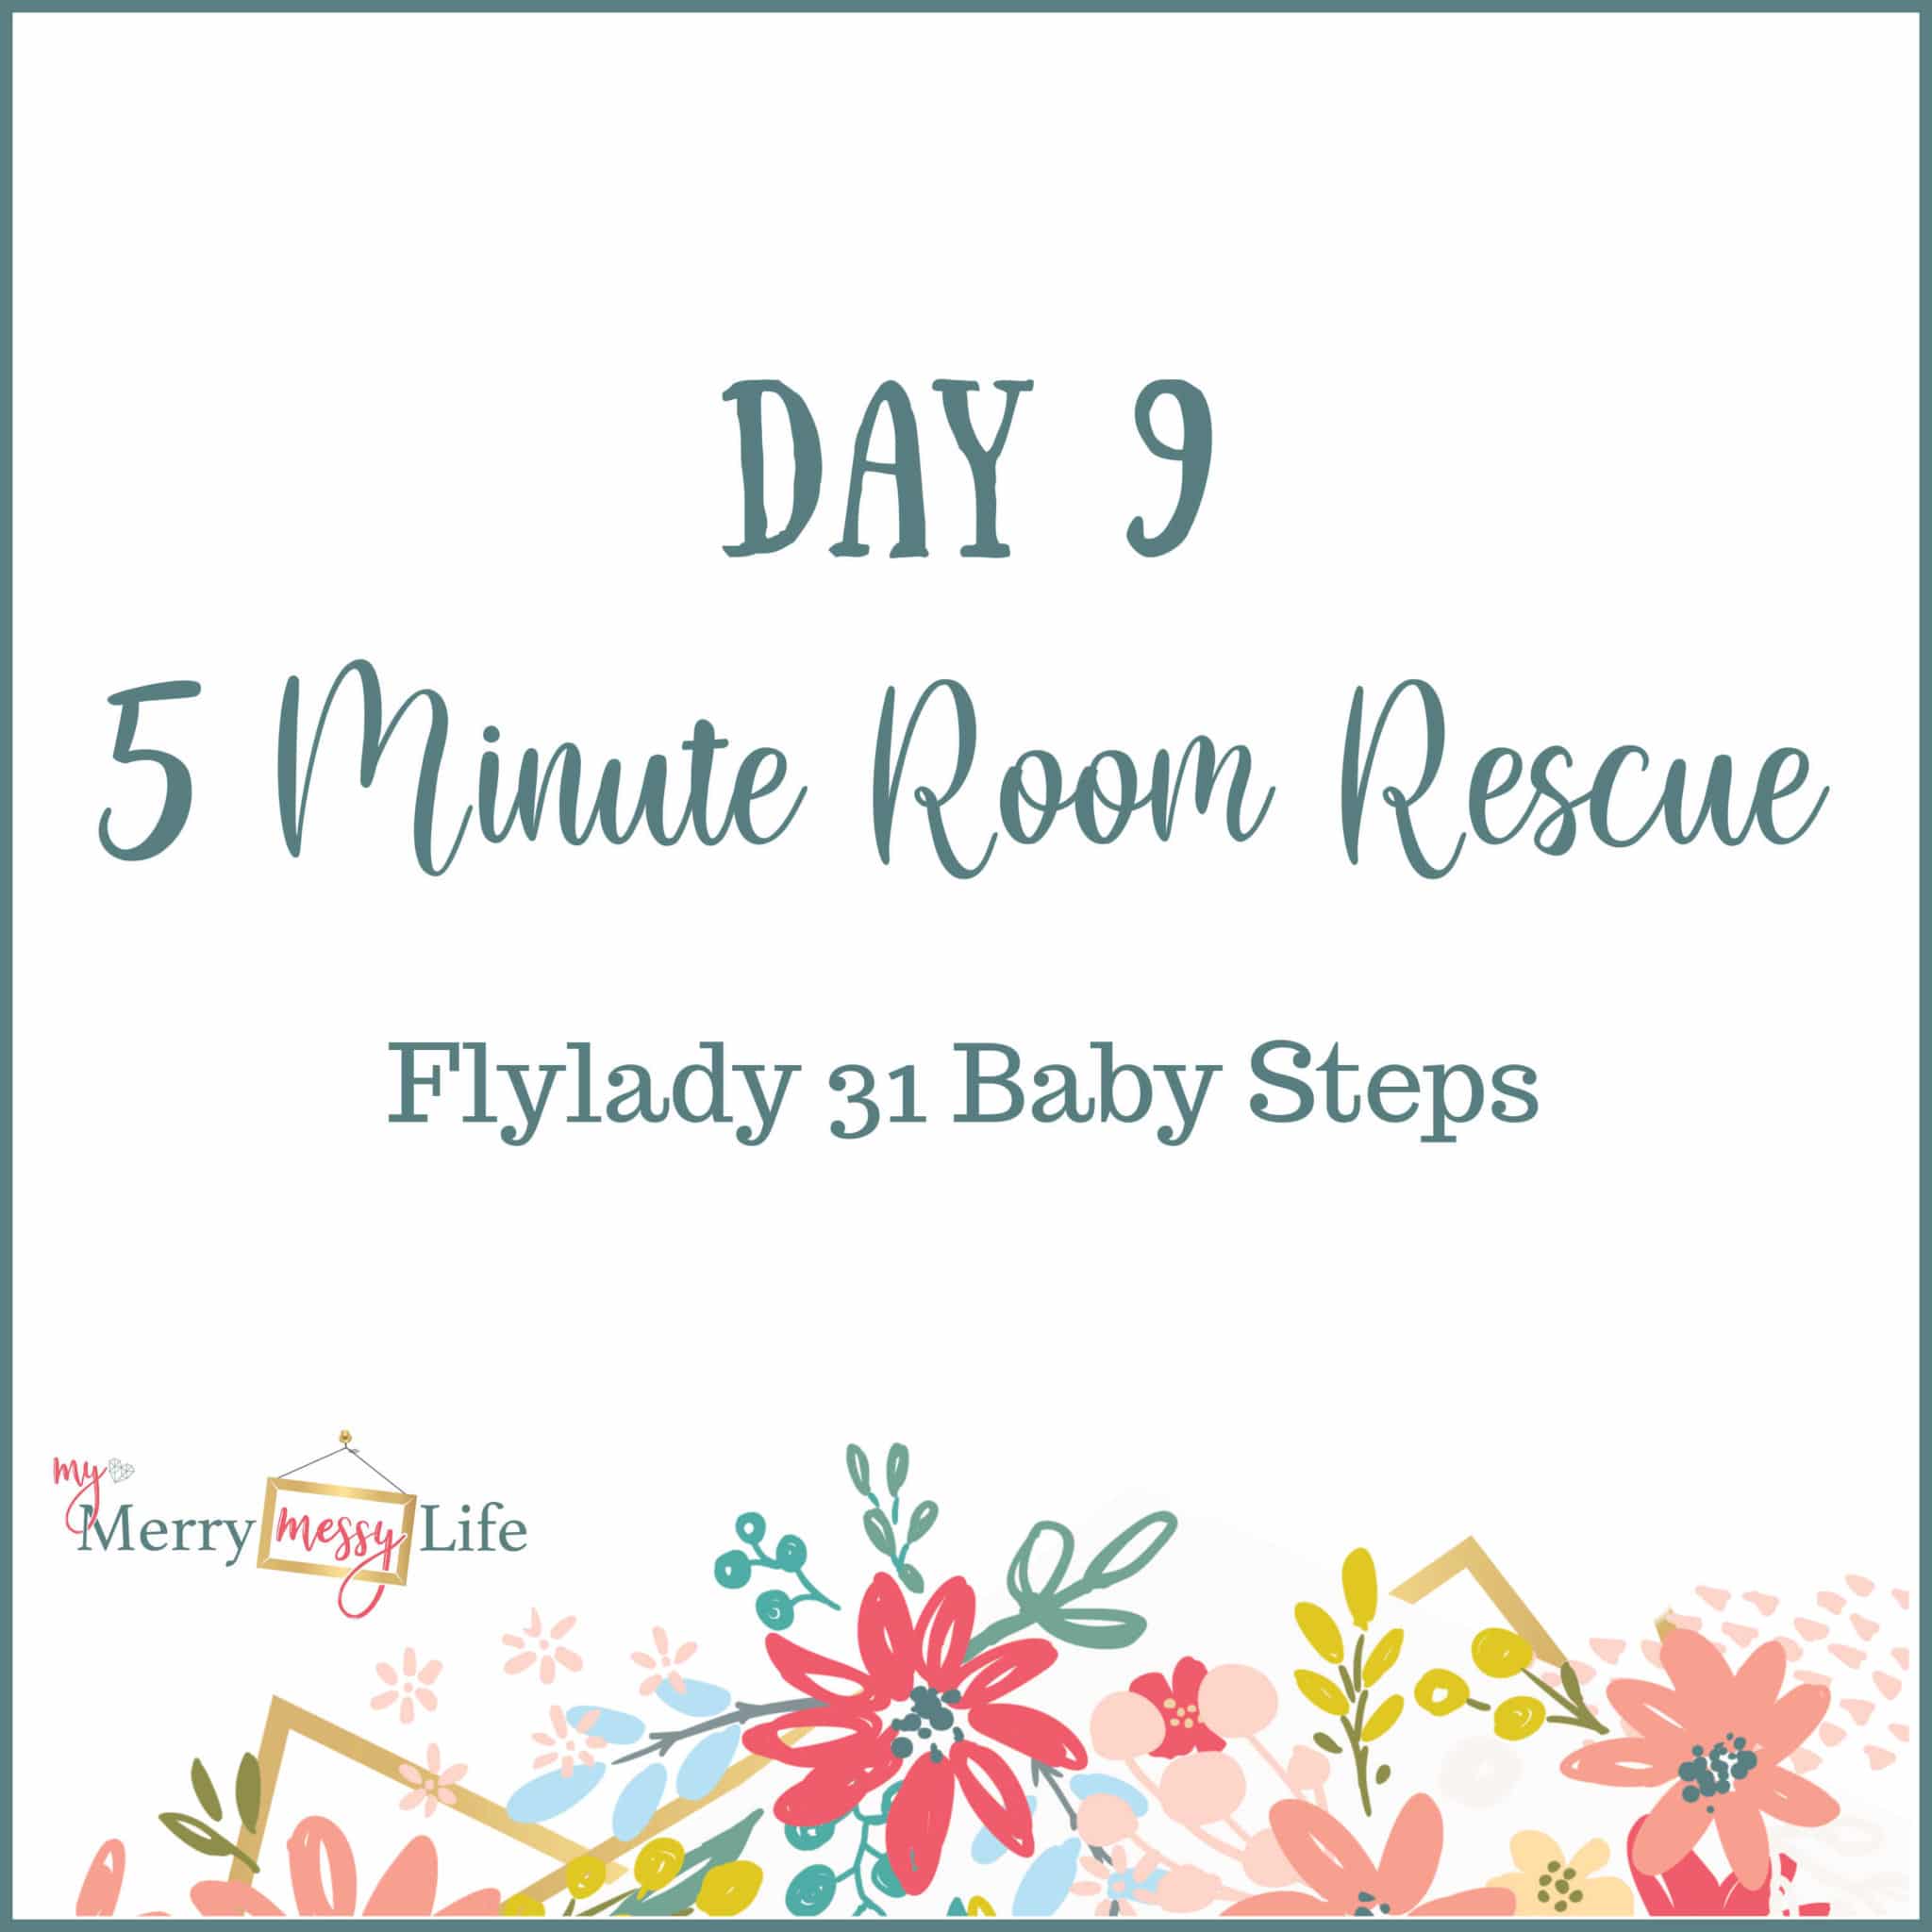 Flylady 31 Baby Steps - Day 9 - 5 Minute Room Rescue